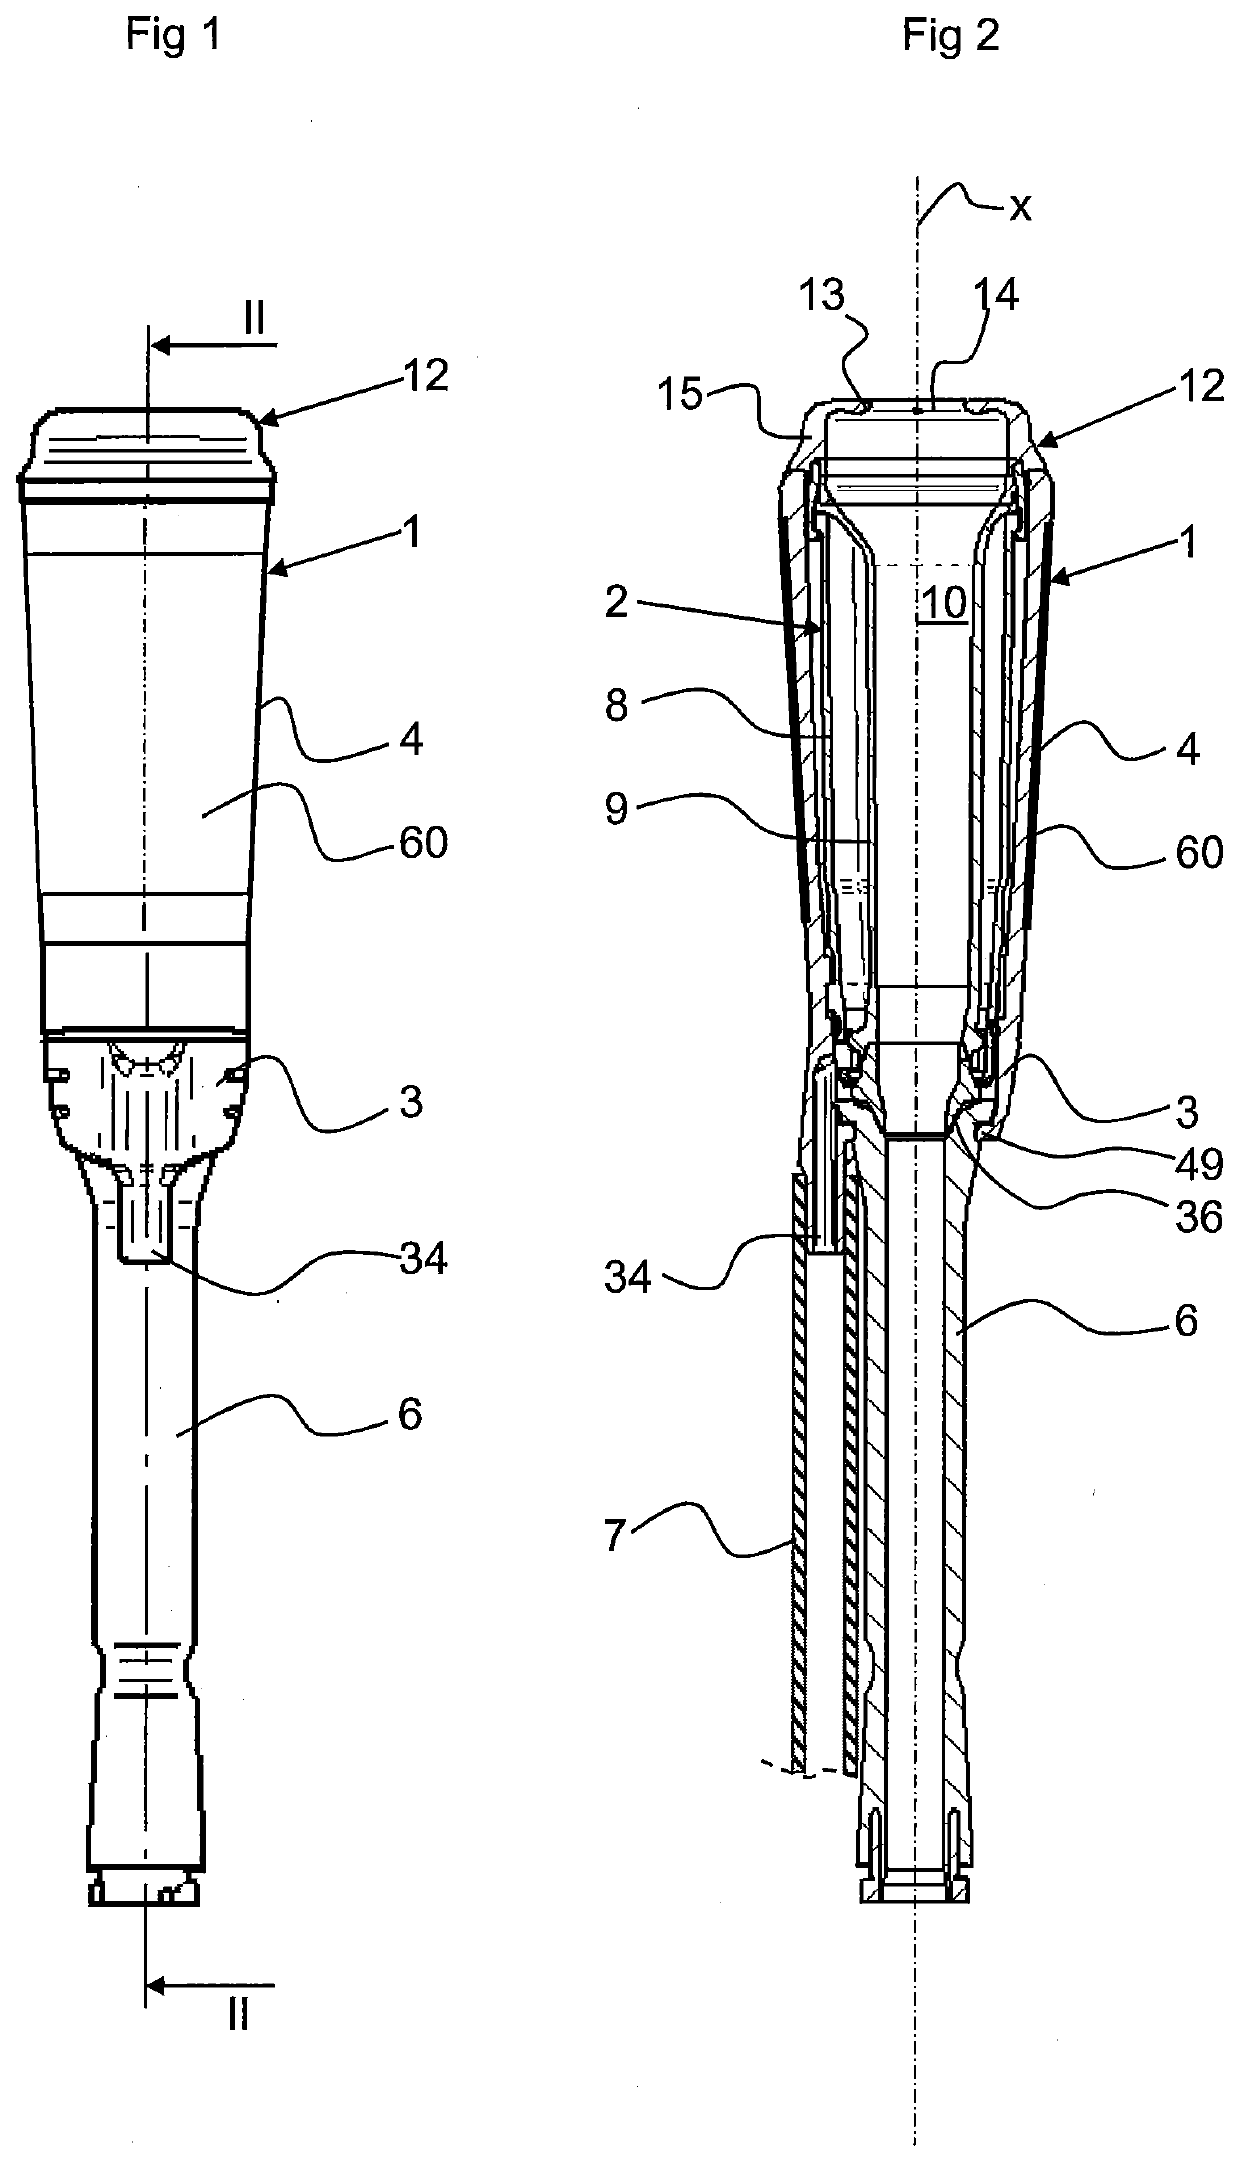 A connector for a teatcup to be attached to the teat of an animal to be milked, and a teatcup